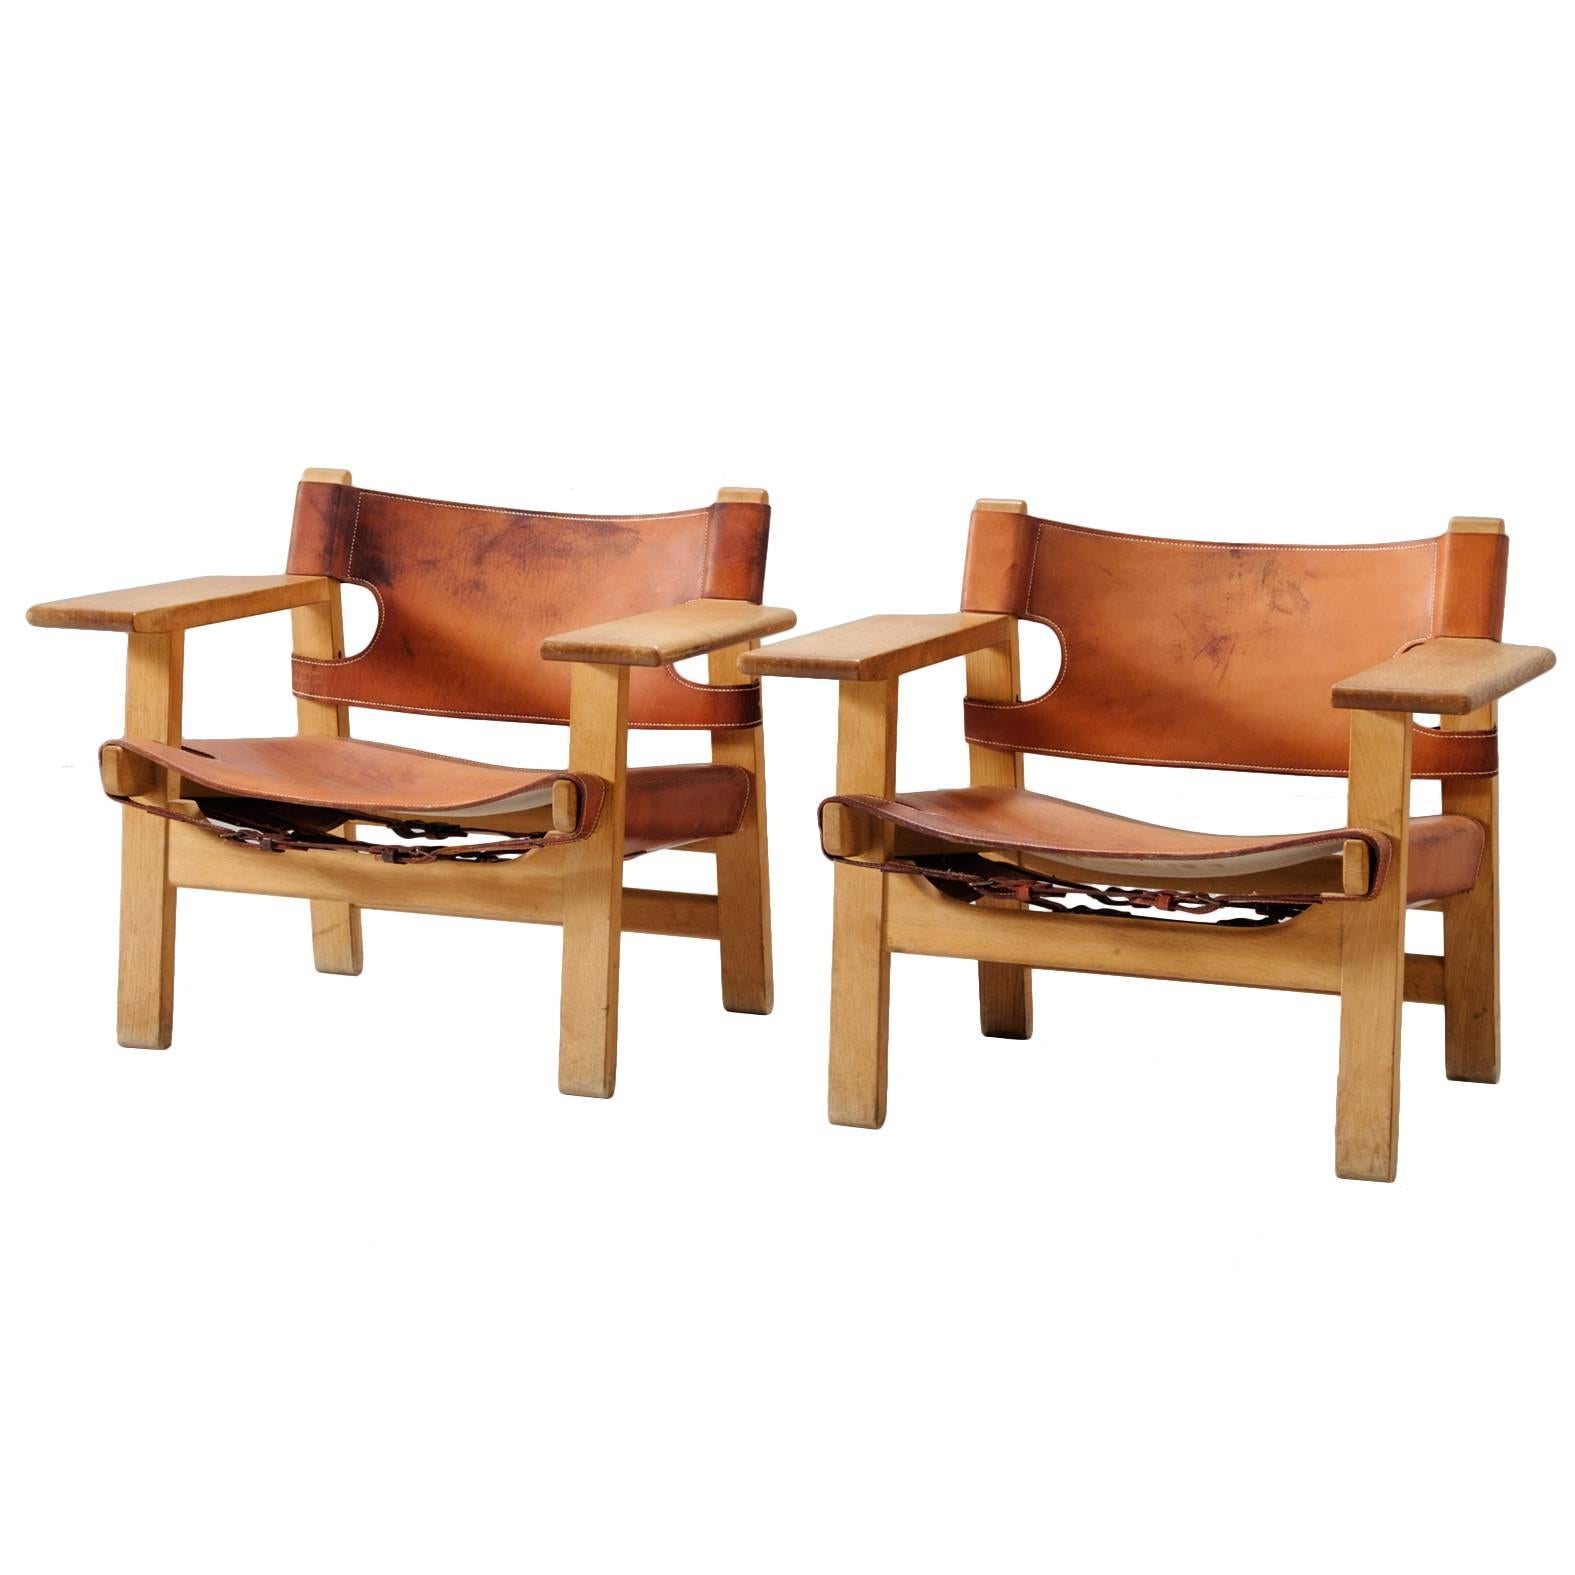 Børge Mogensen 'Spanish Chairs' in Solid Oak and Cognac Leather 